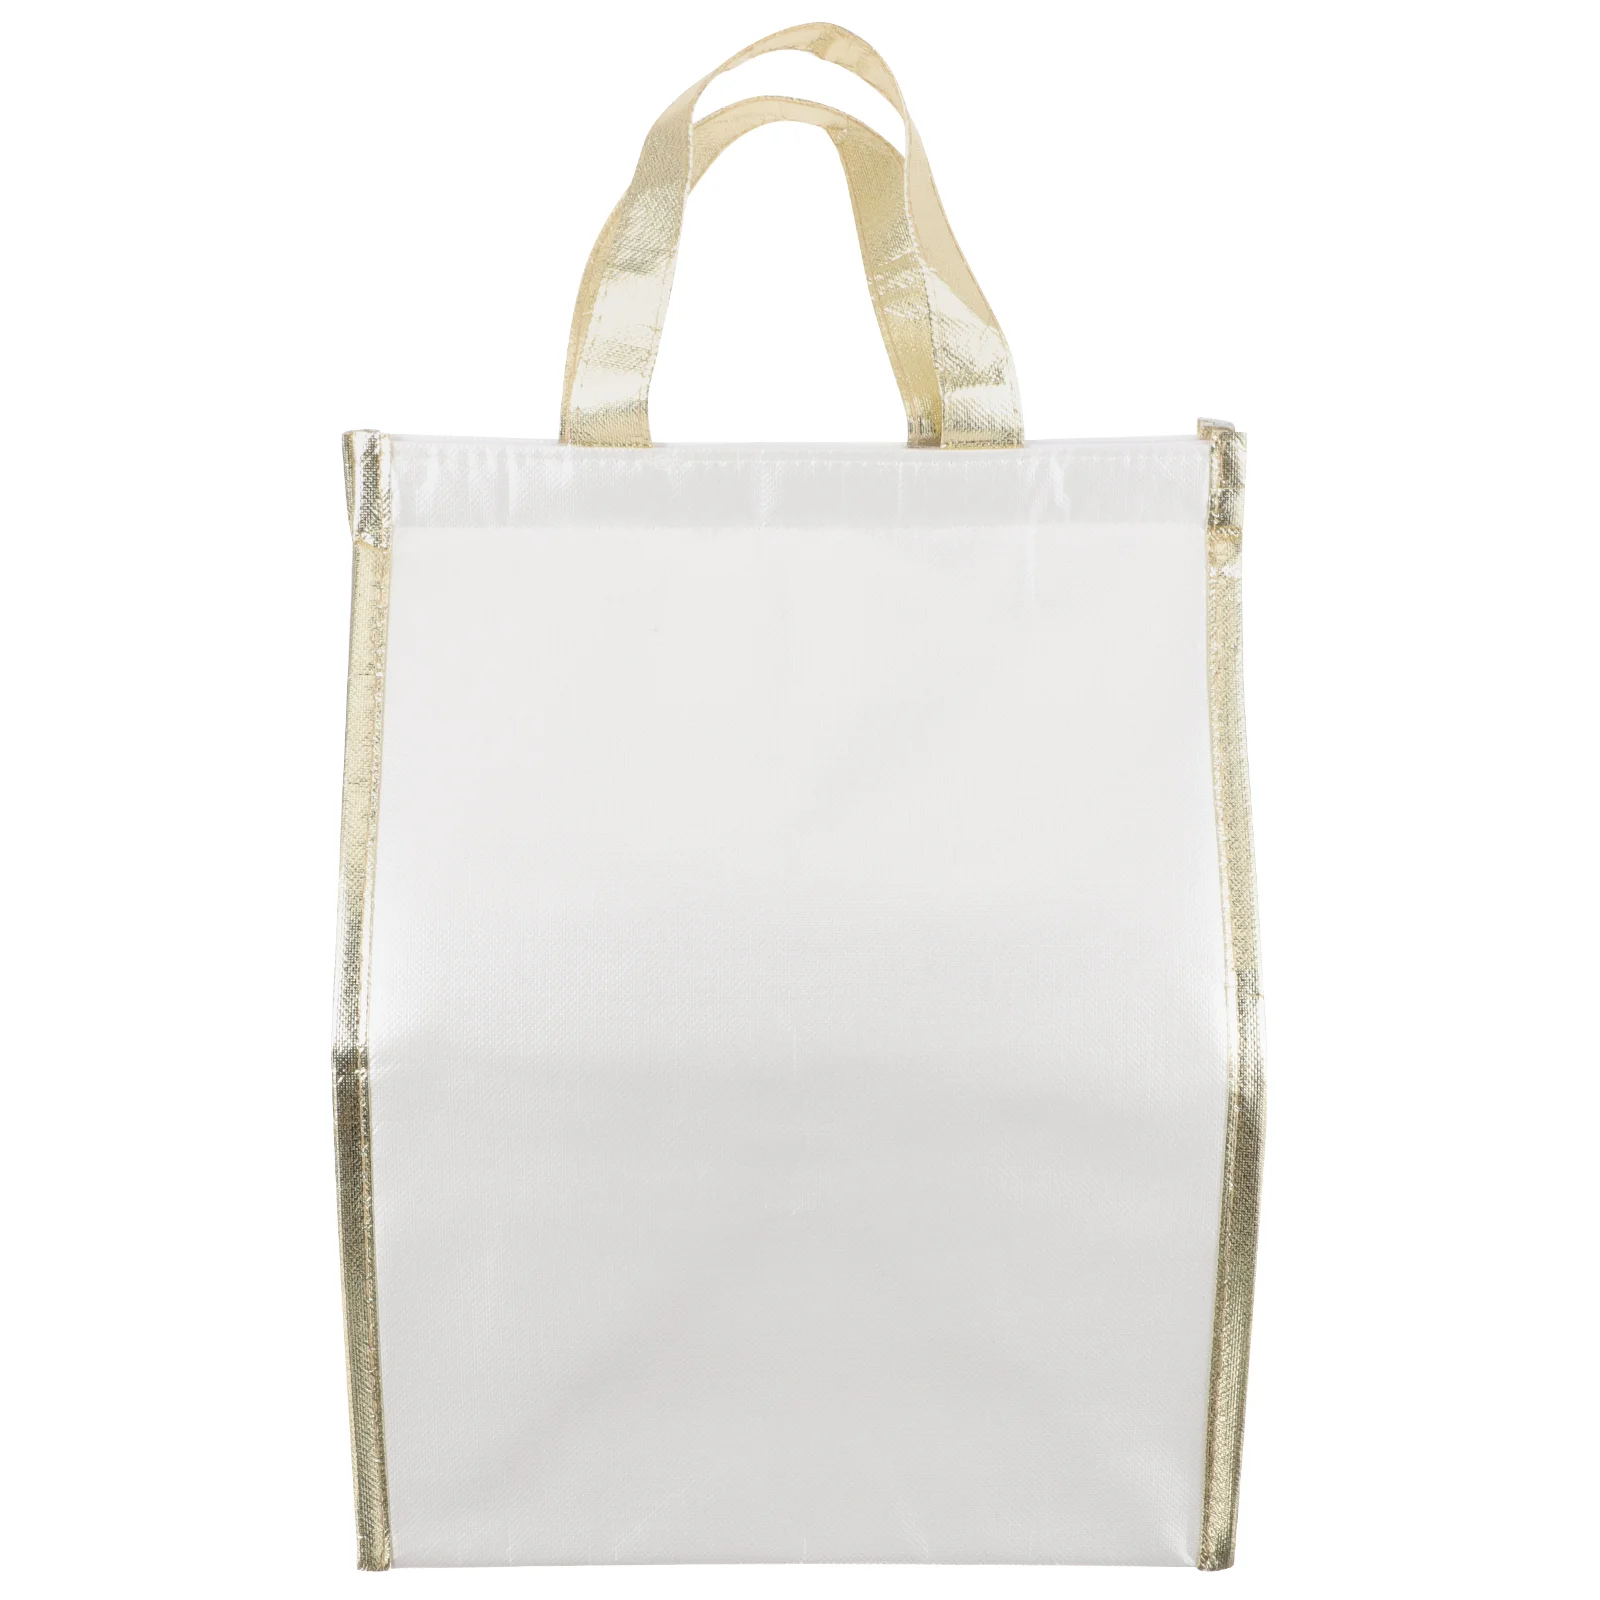 

Lunch Bag Tote Bag Pizza Bag For Delivery Carry Hot Delivery Bag for Cake Food Takeout